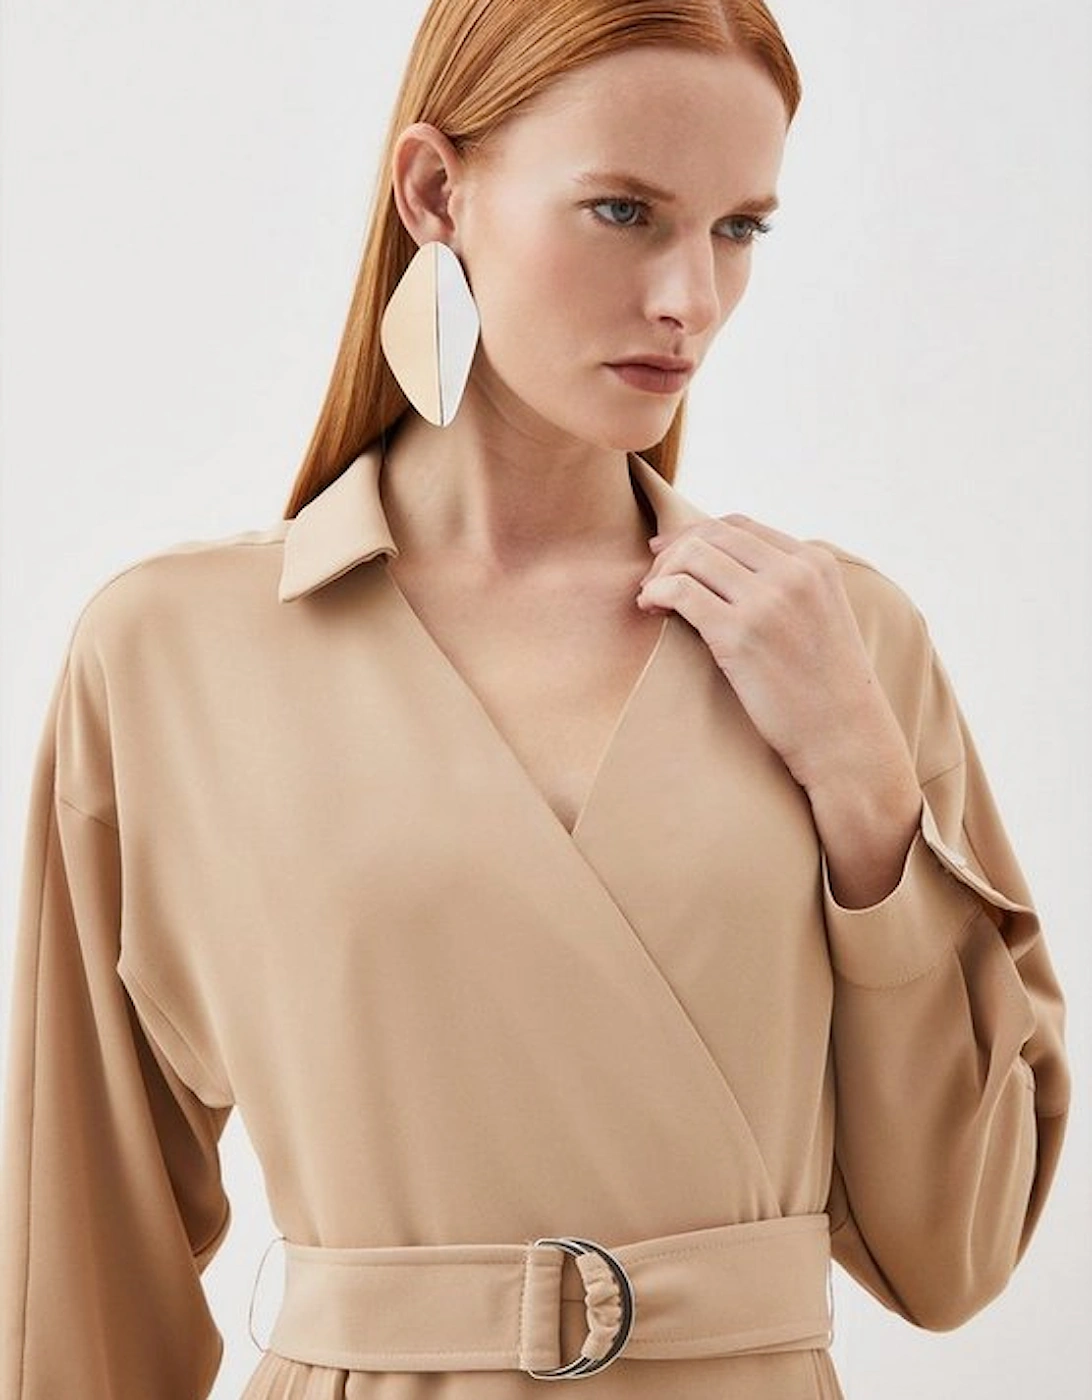 Soft Tailored Pleat Detail Belted Shirt Dress